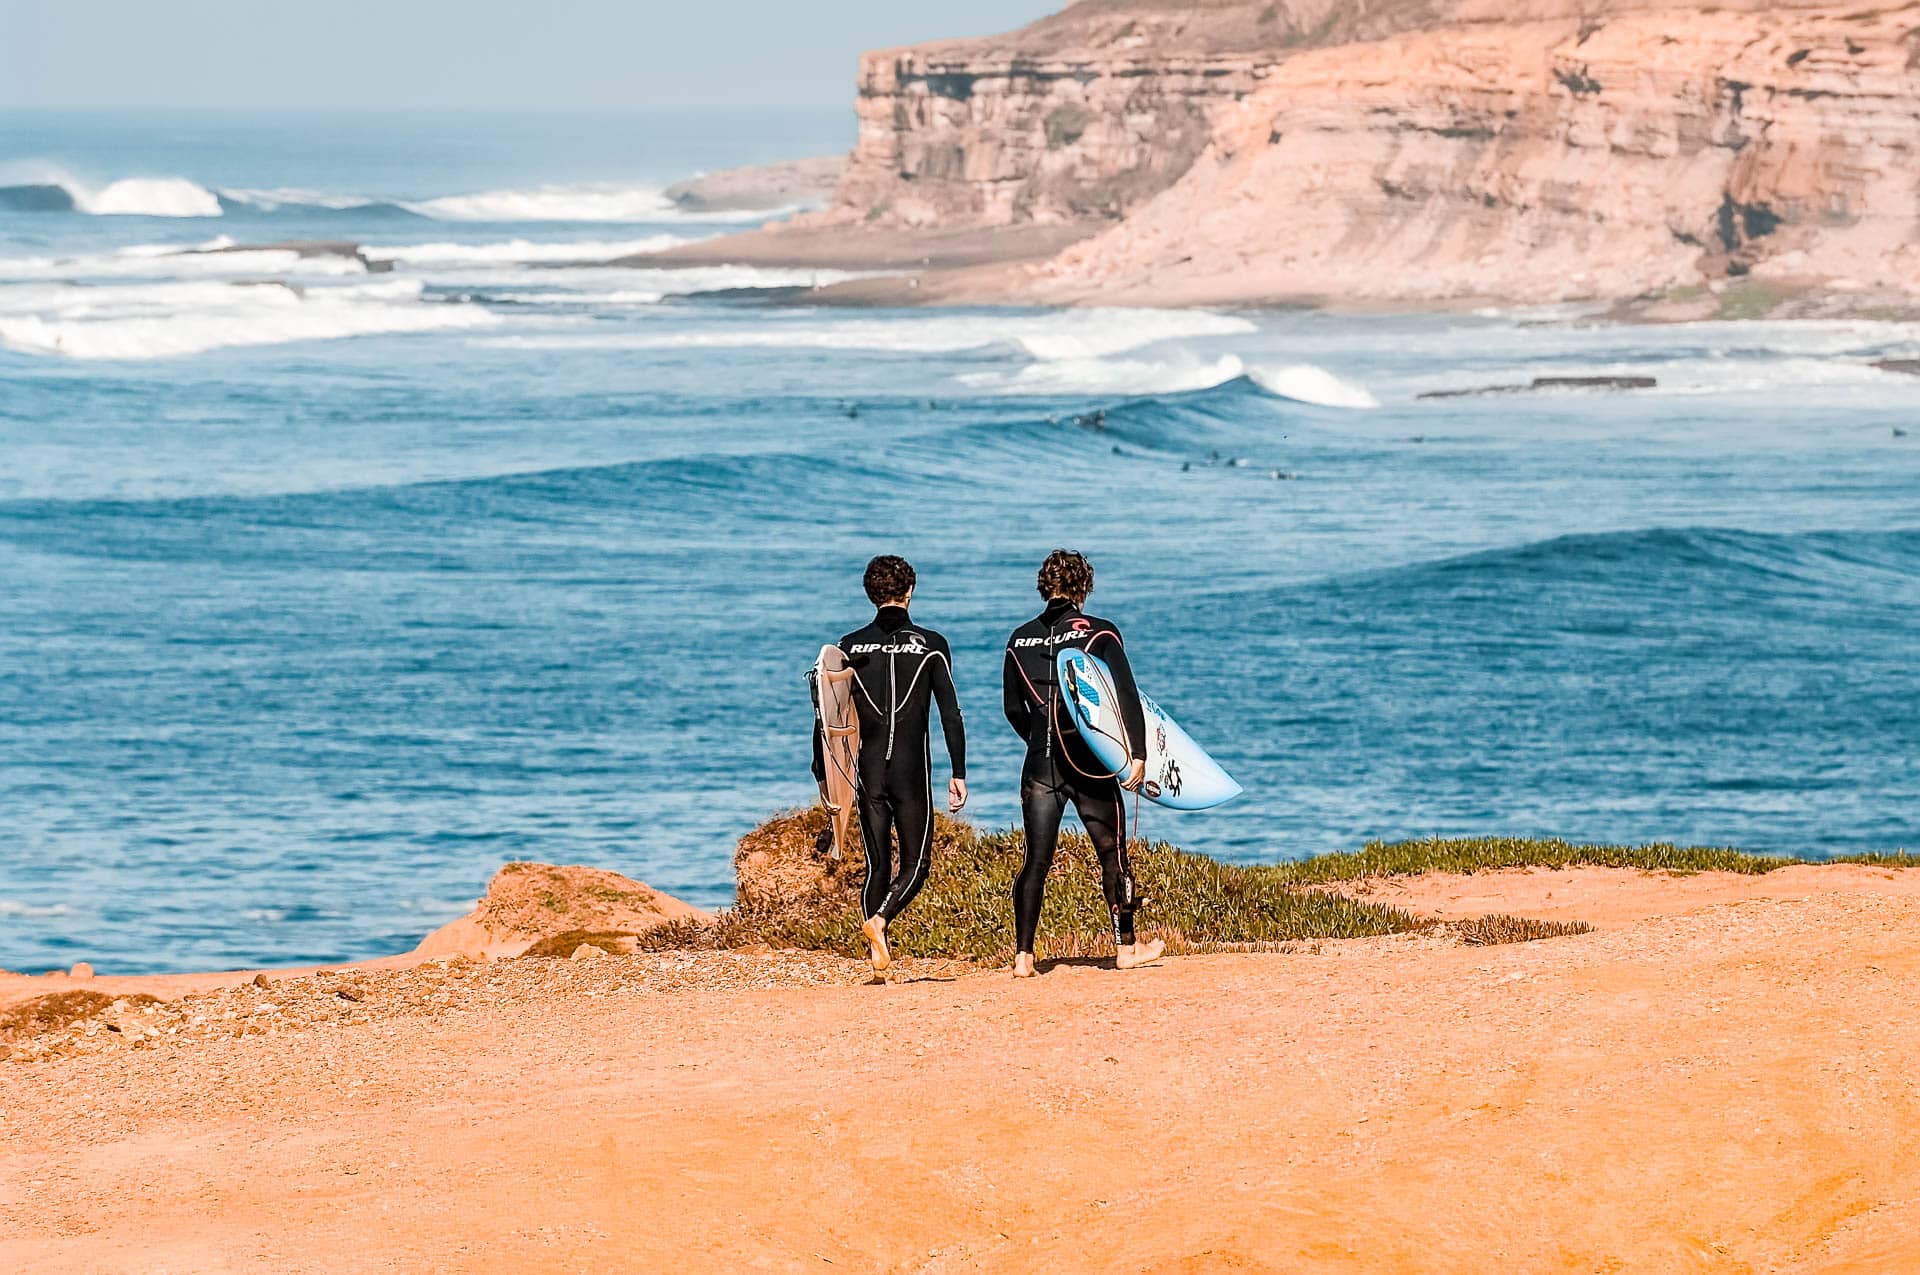 Two surfers walking with surfboards towards the ocean.